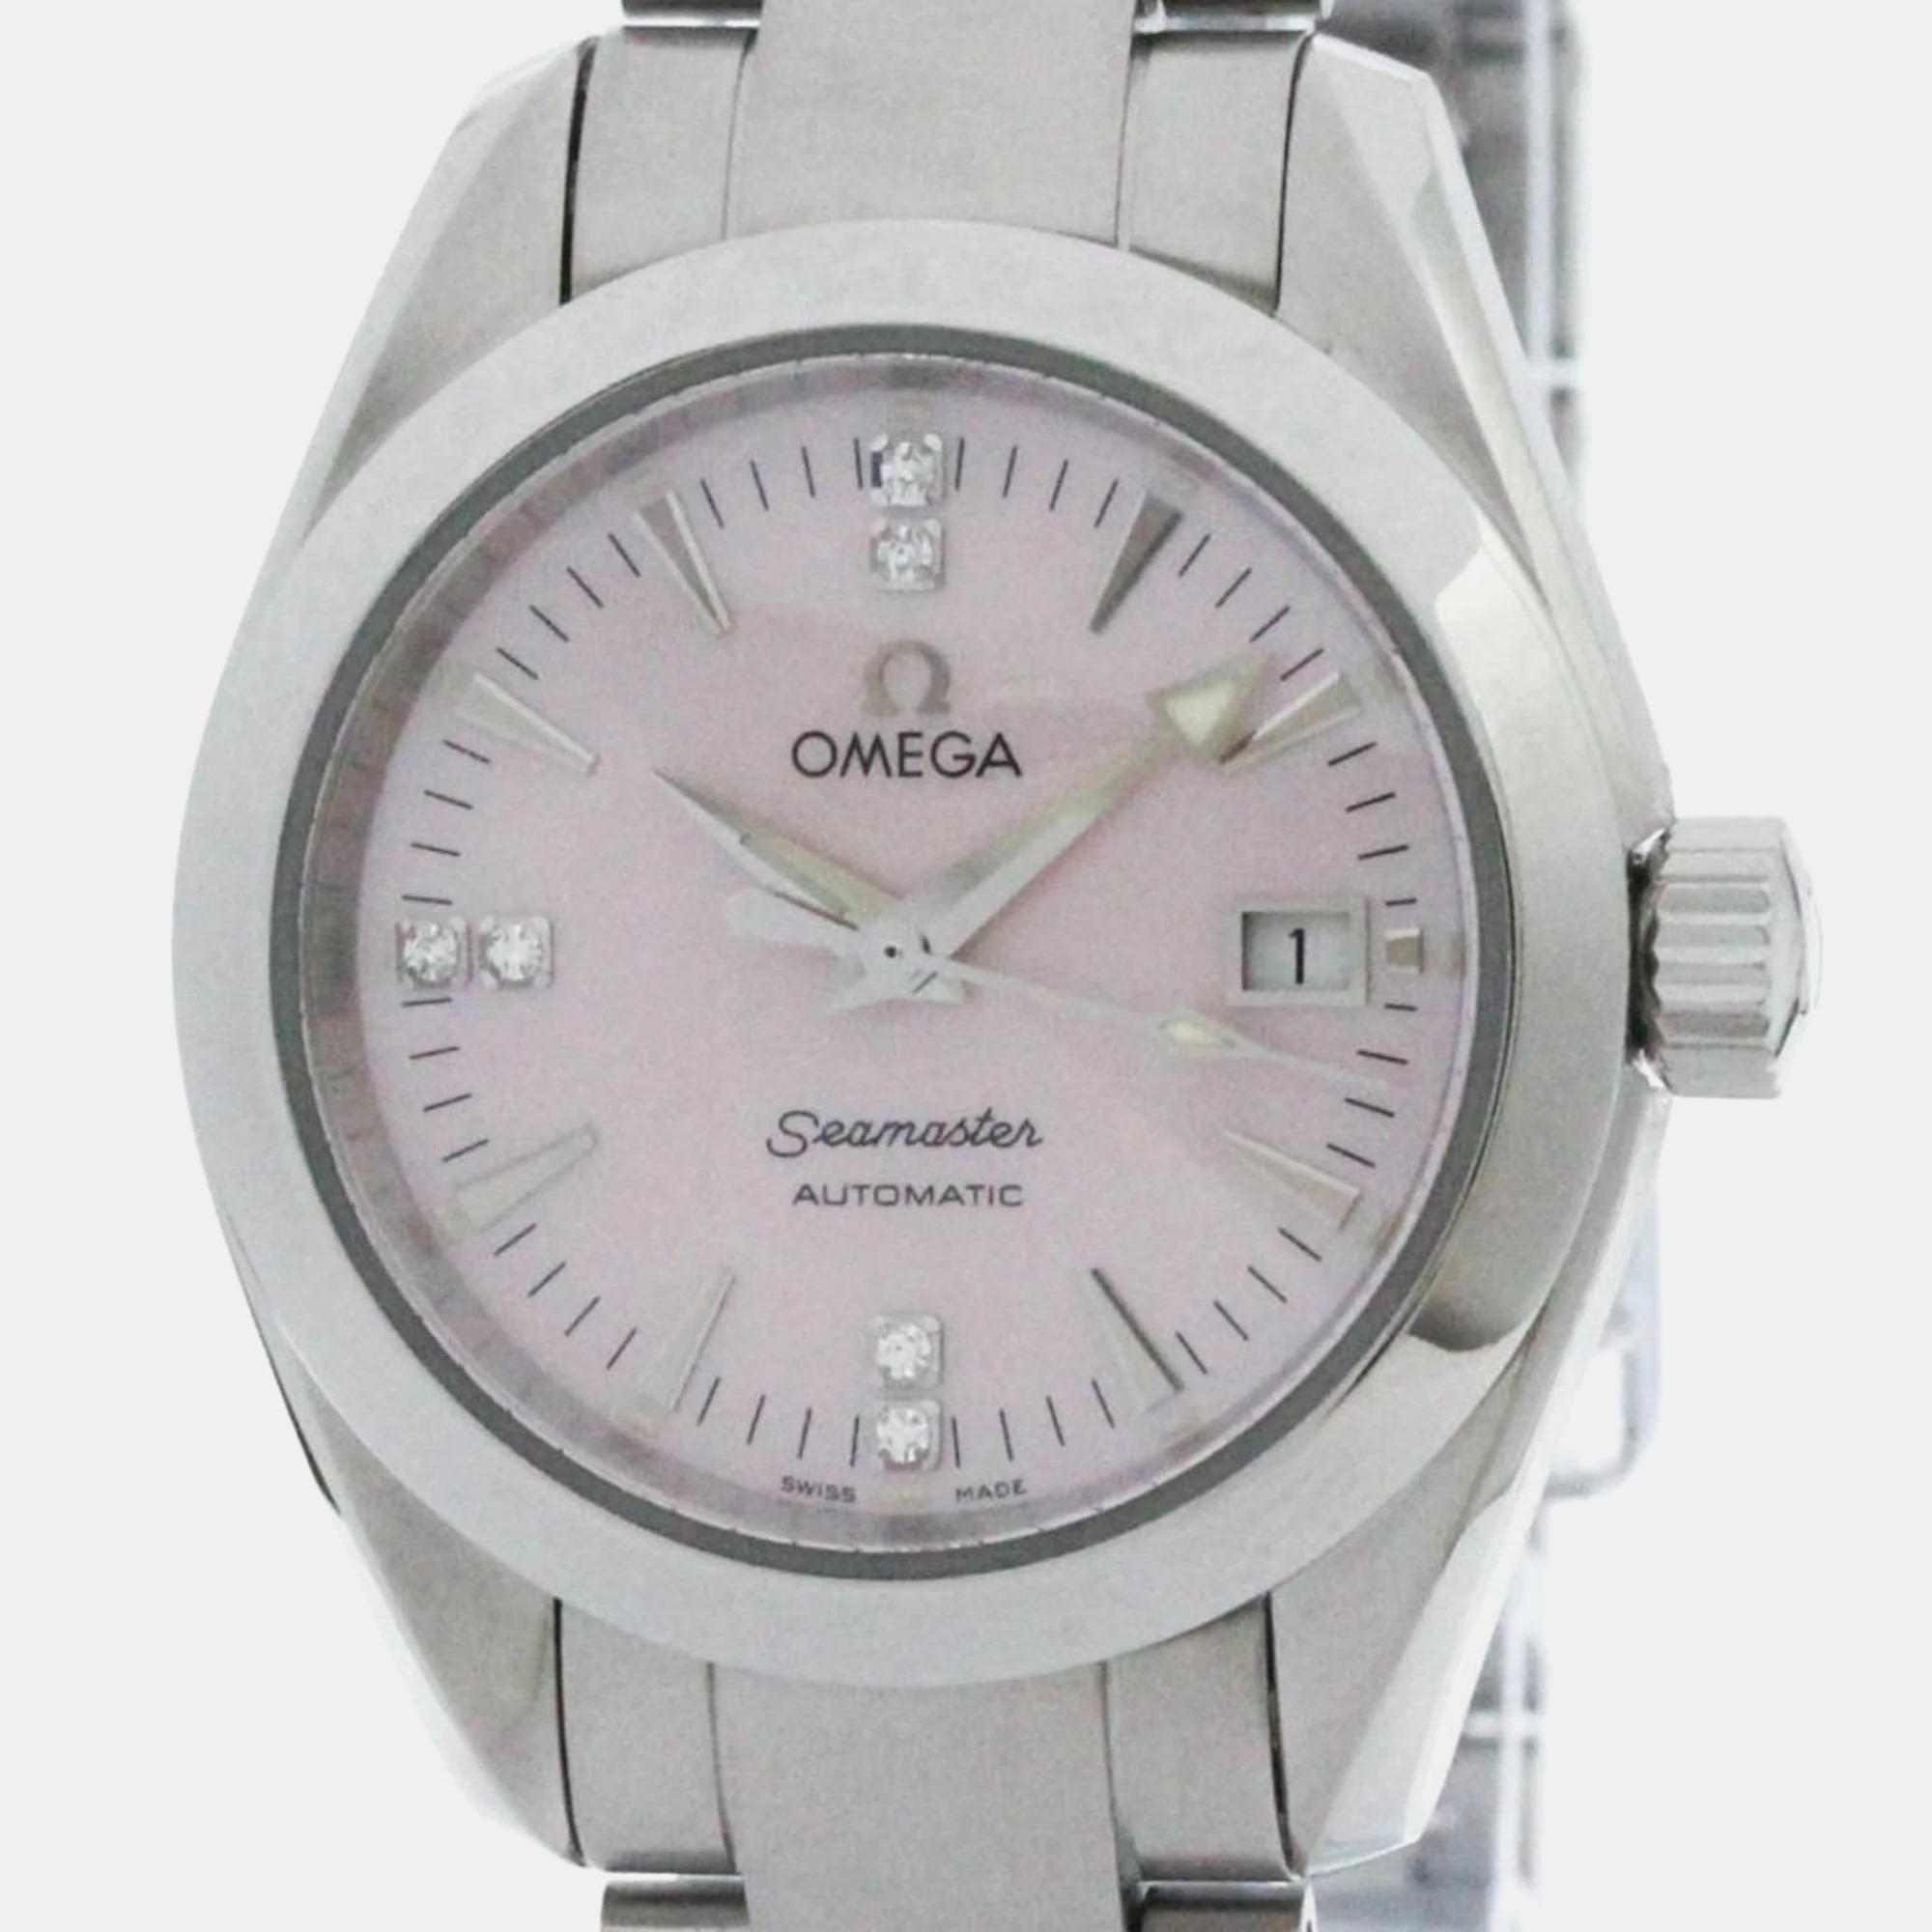 Omega pink shell stainless steel seamaster aqua terra automatic men's wristwatch 29 mm